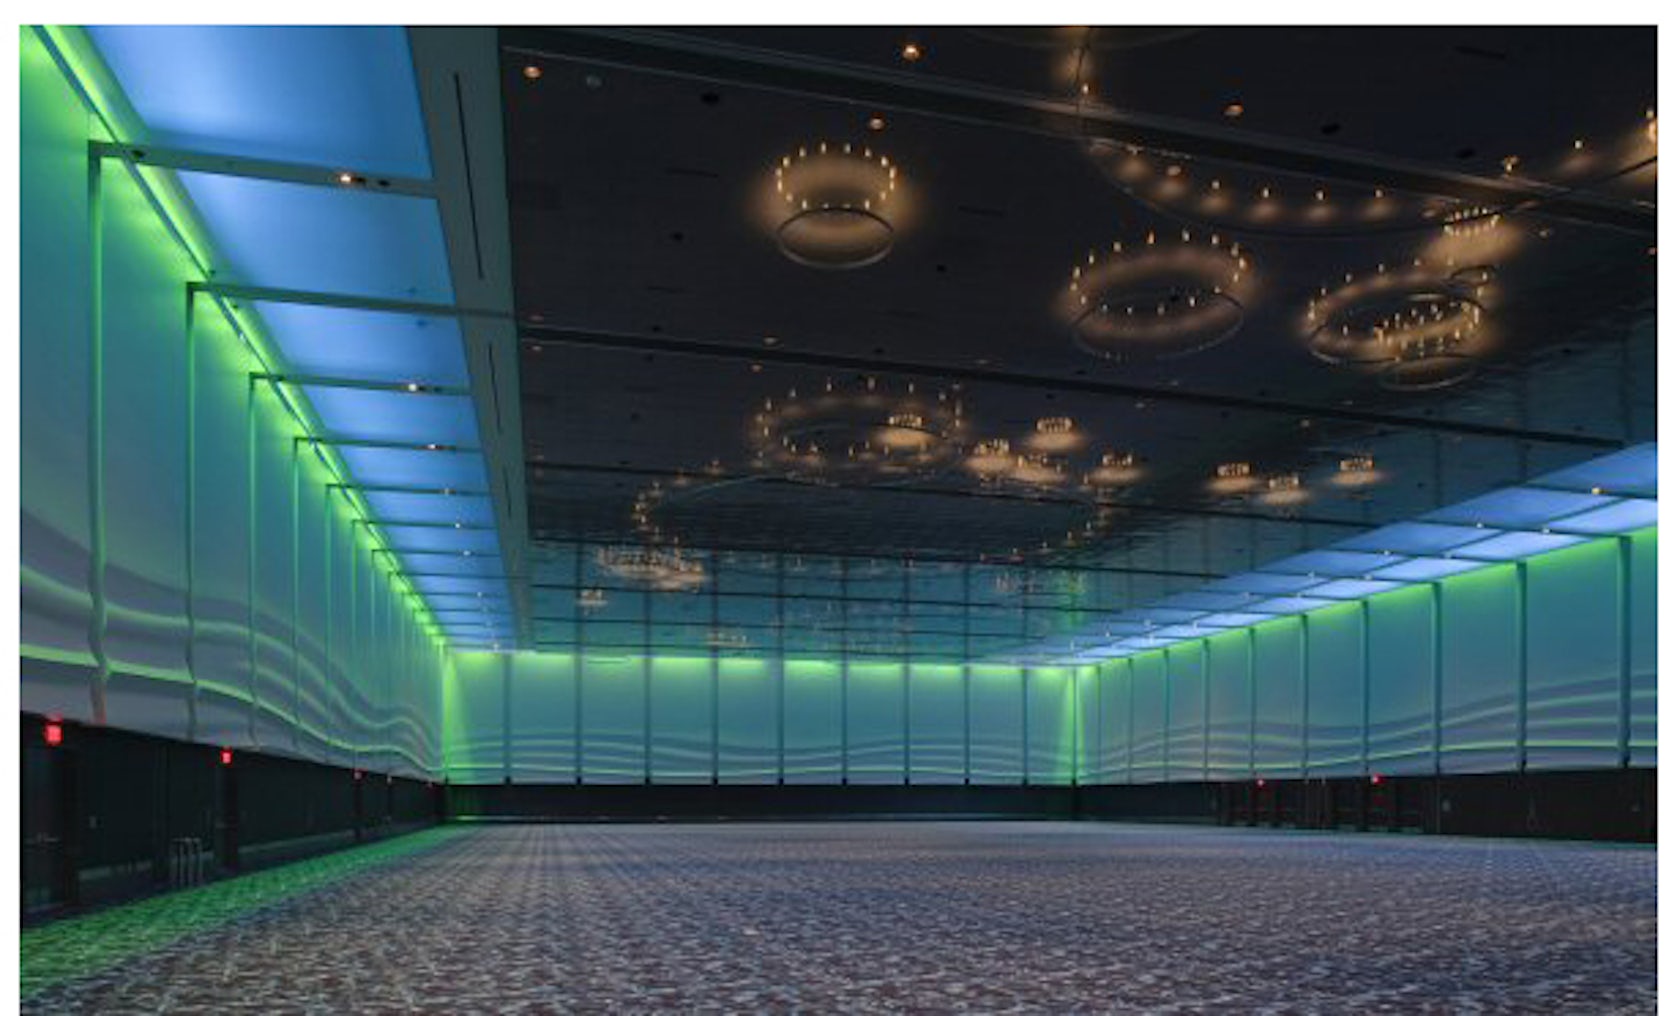 Bartle Hall Convention Center Ballroom Expansion Architizer